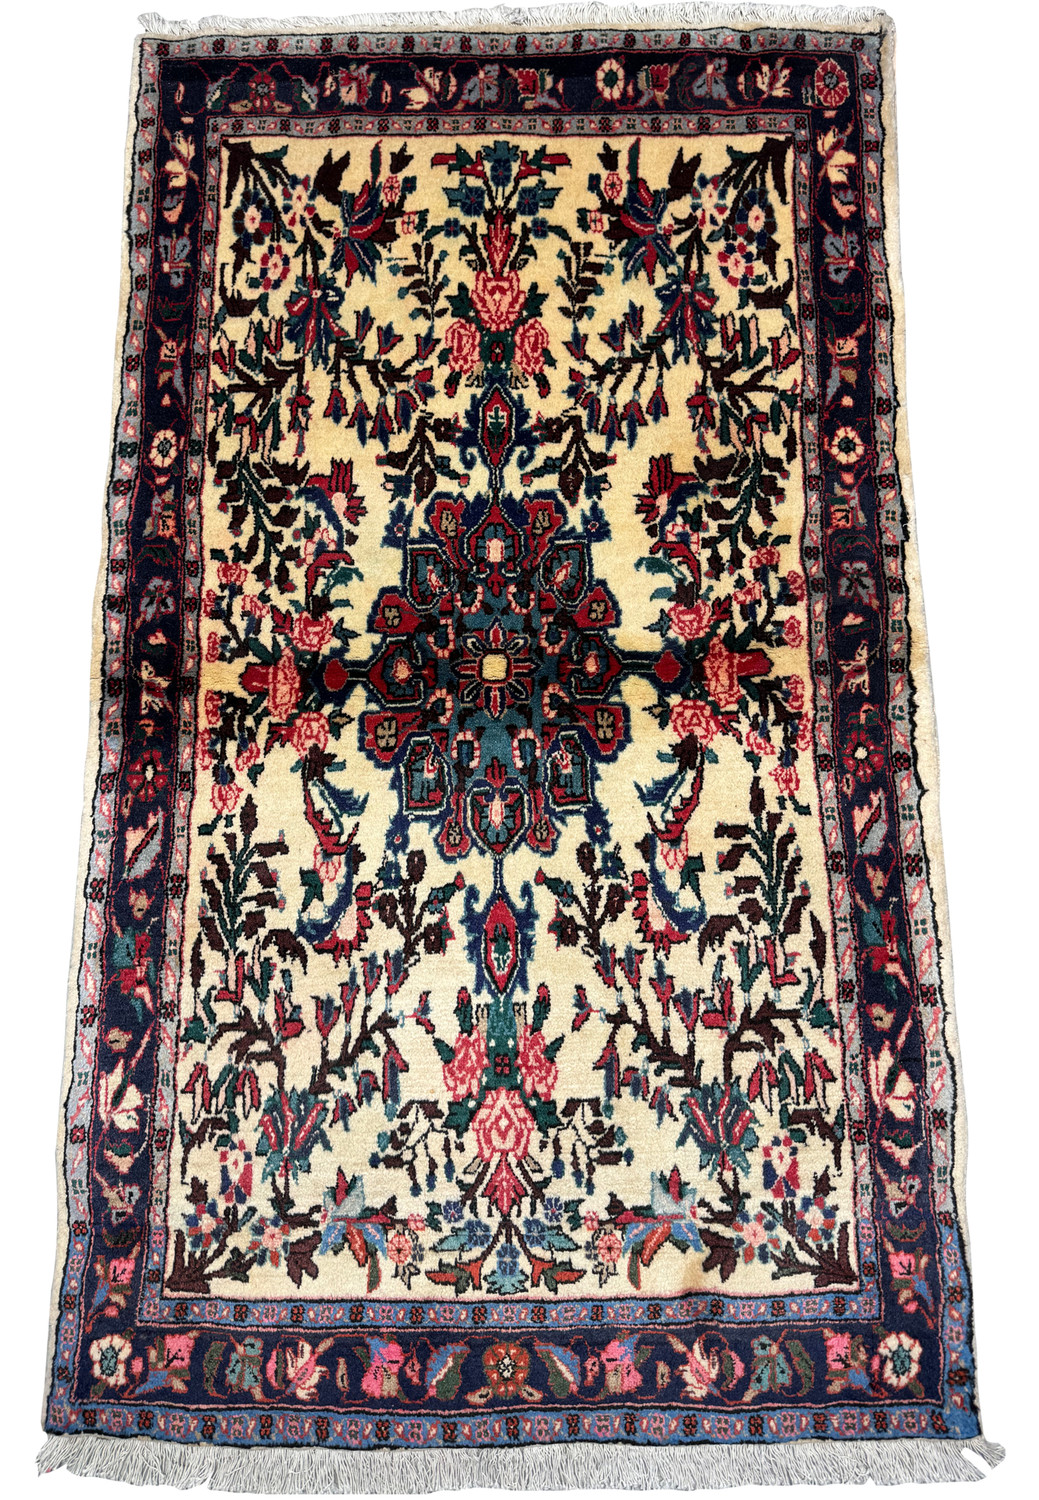 Full view of a traditional 2'7 x 4'6 Floral Persian Bijar Rug showcasing a central floral medallion, framed by an ornate navy border and floral accents